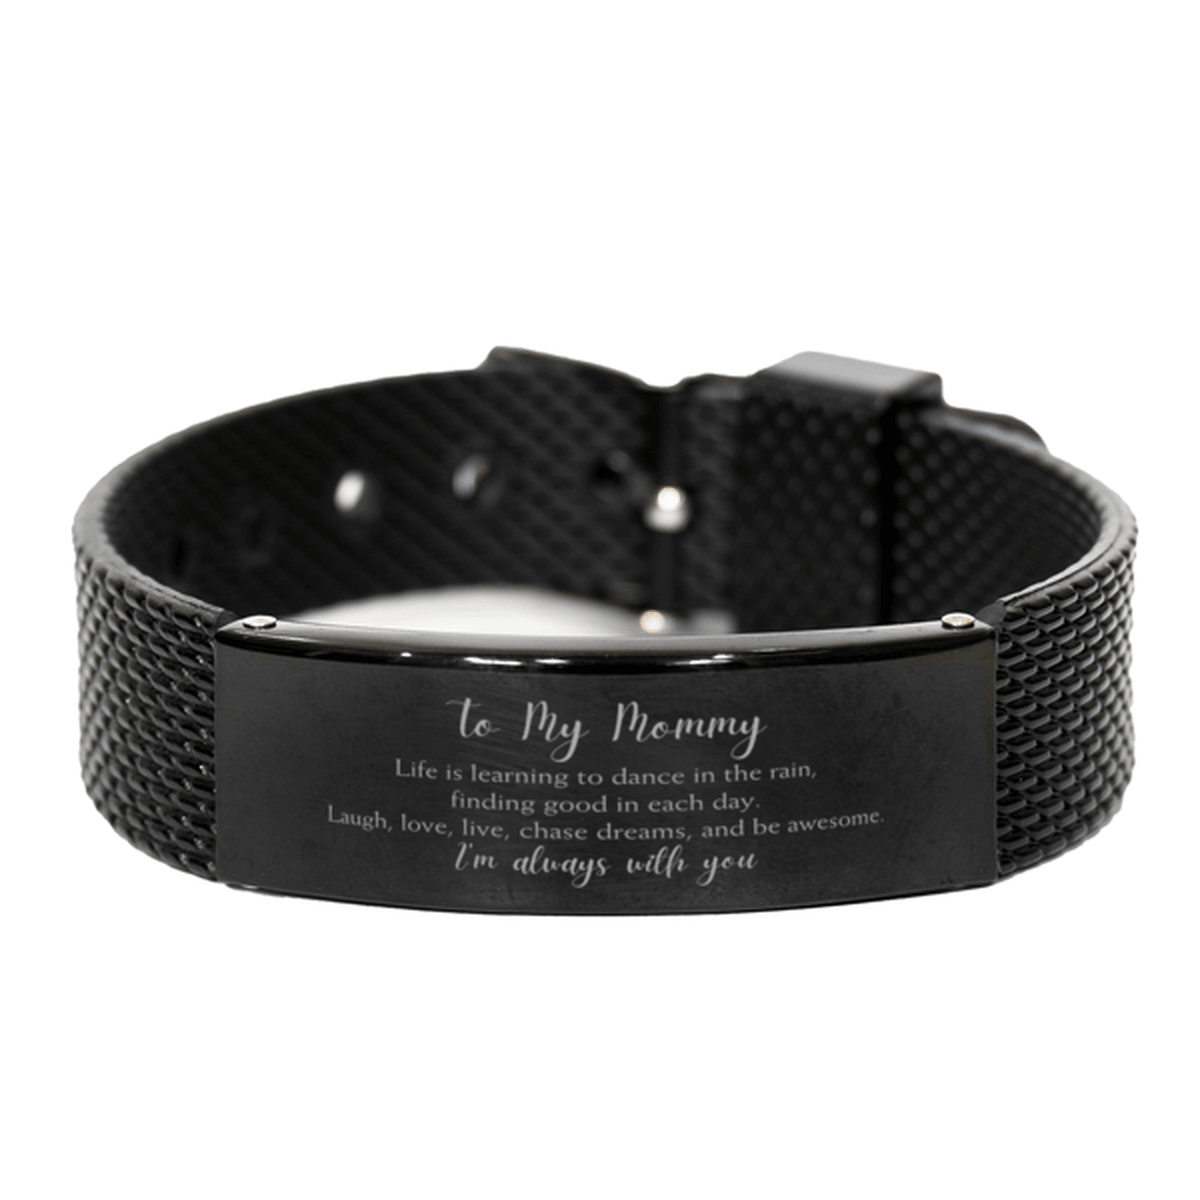 Mommy Christmas Perfect Gifts, Mommy Black Shark Mesh Bracelet, Motivational Mommy Engraved Gifts, Birthday Gifts For Mommy, To My Mommy Life is learning to dance in the rain, finding good in each day. I'm always with you